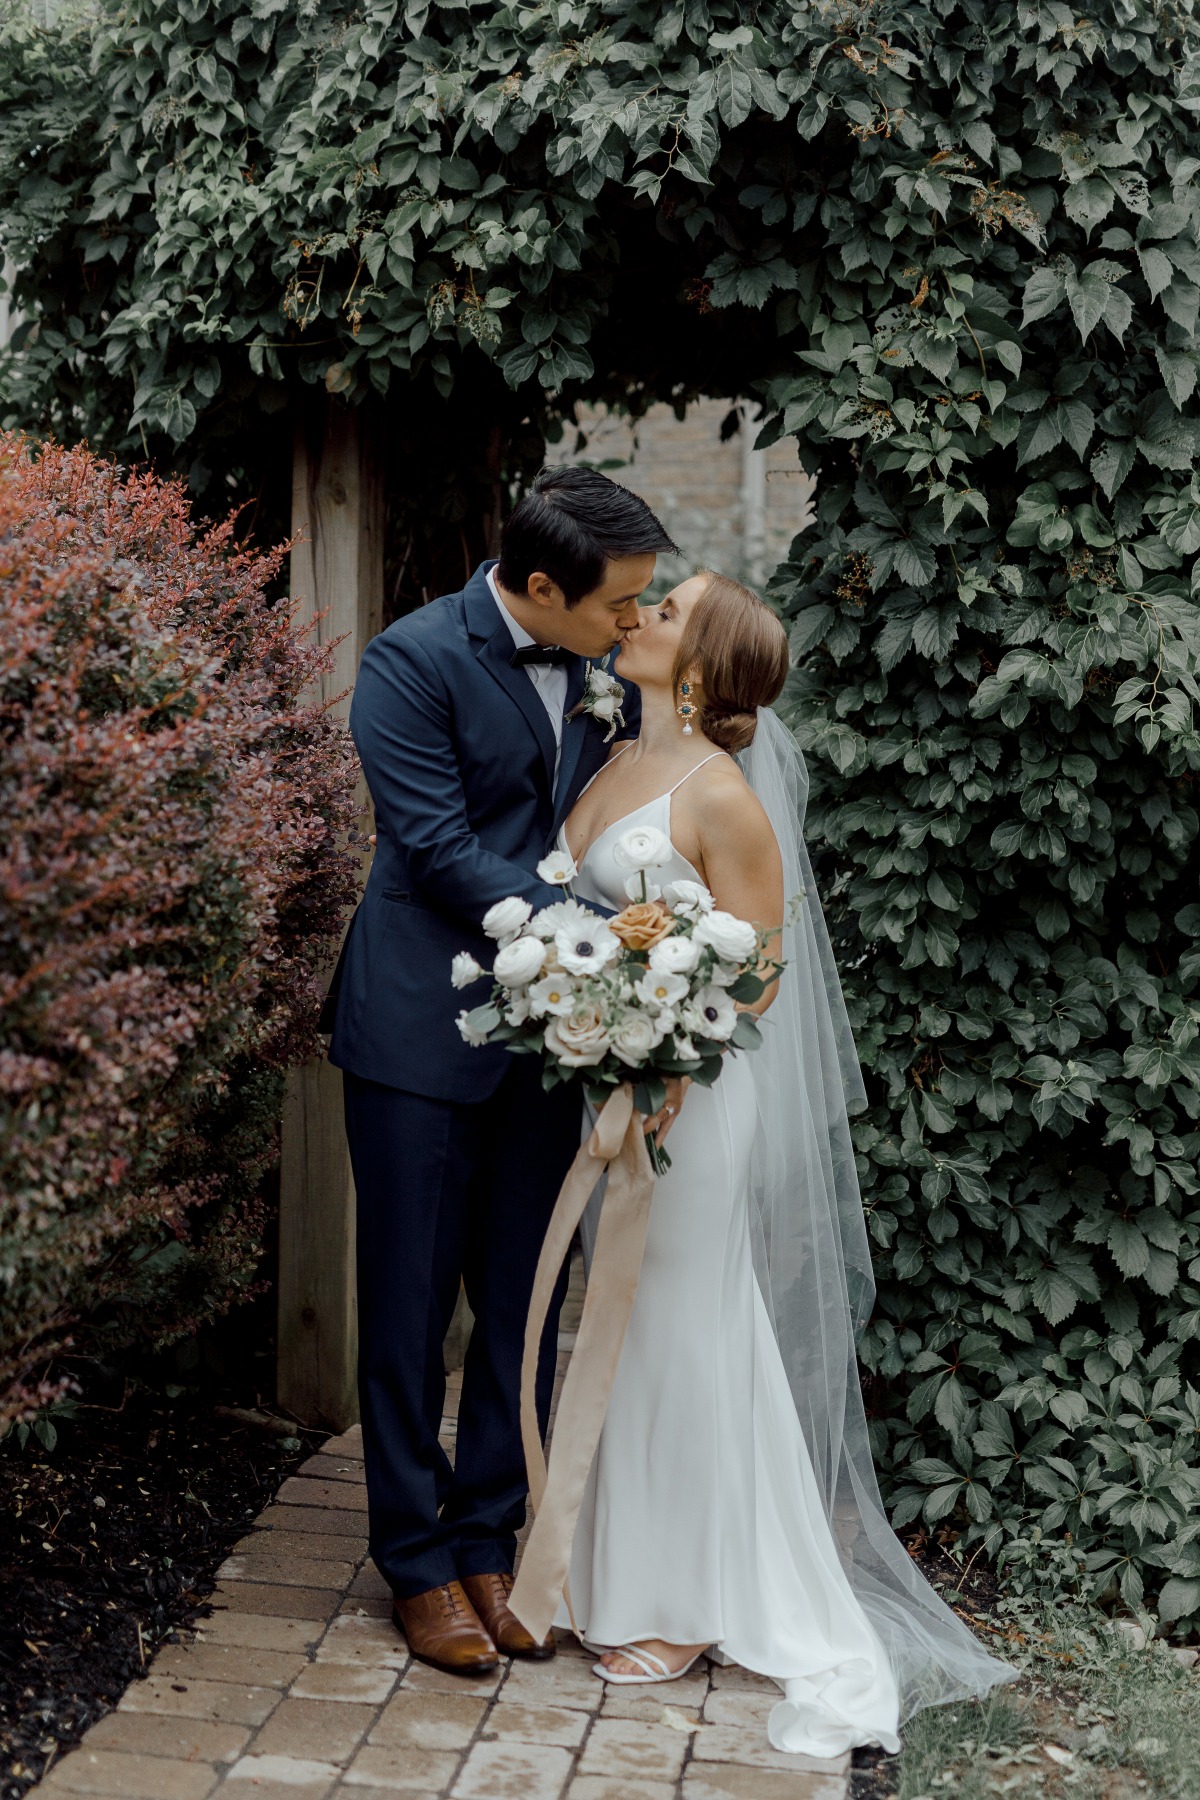 Bride and groom kissing in front of ivy walkway